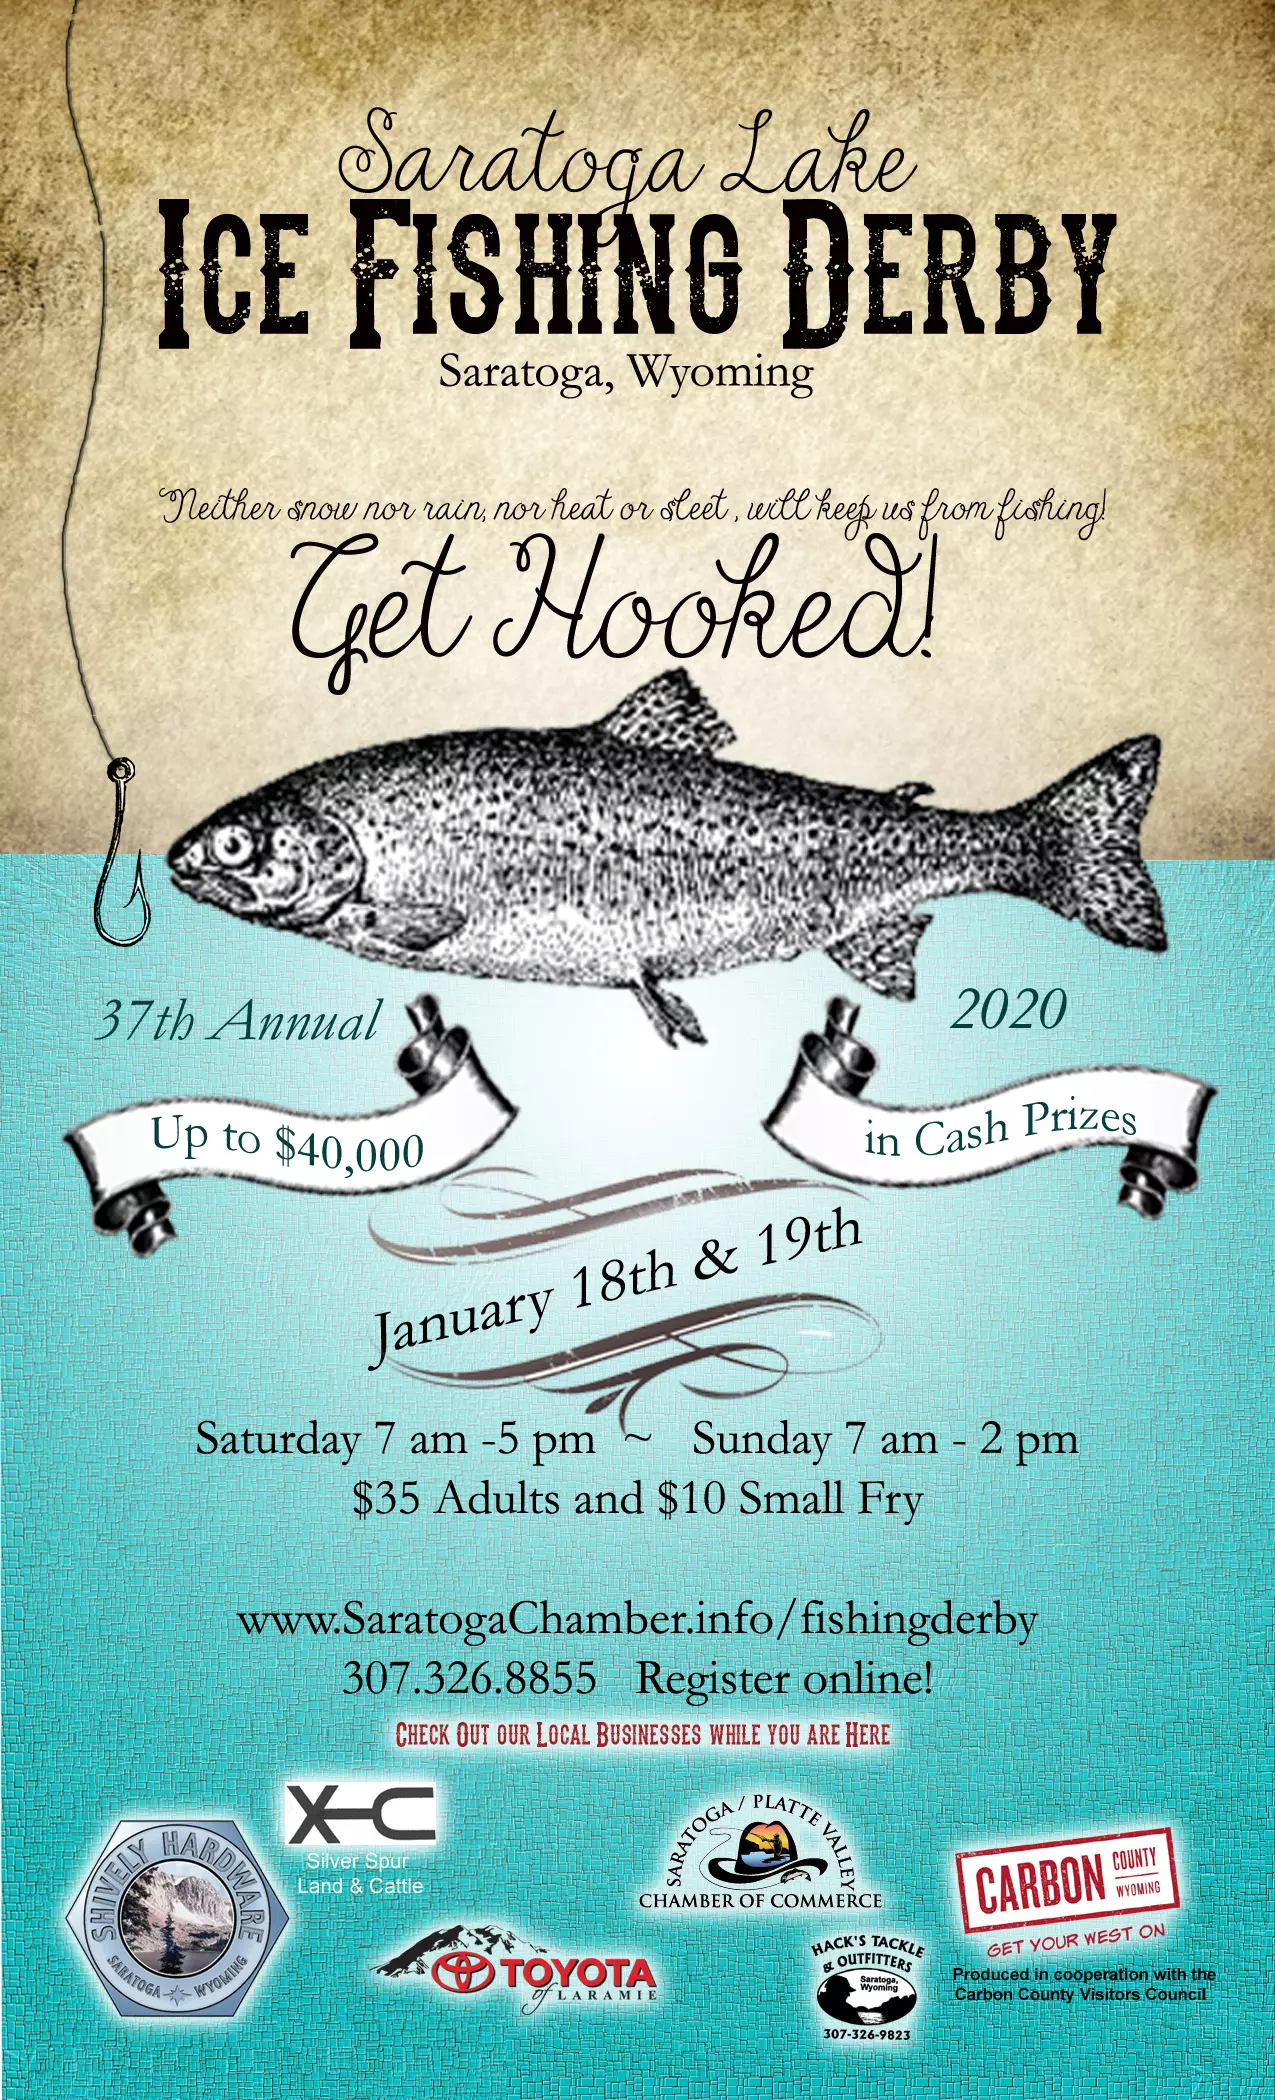 The 37th annual Saratoga Ice Fishing Derby is January 18 and 19